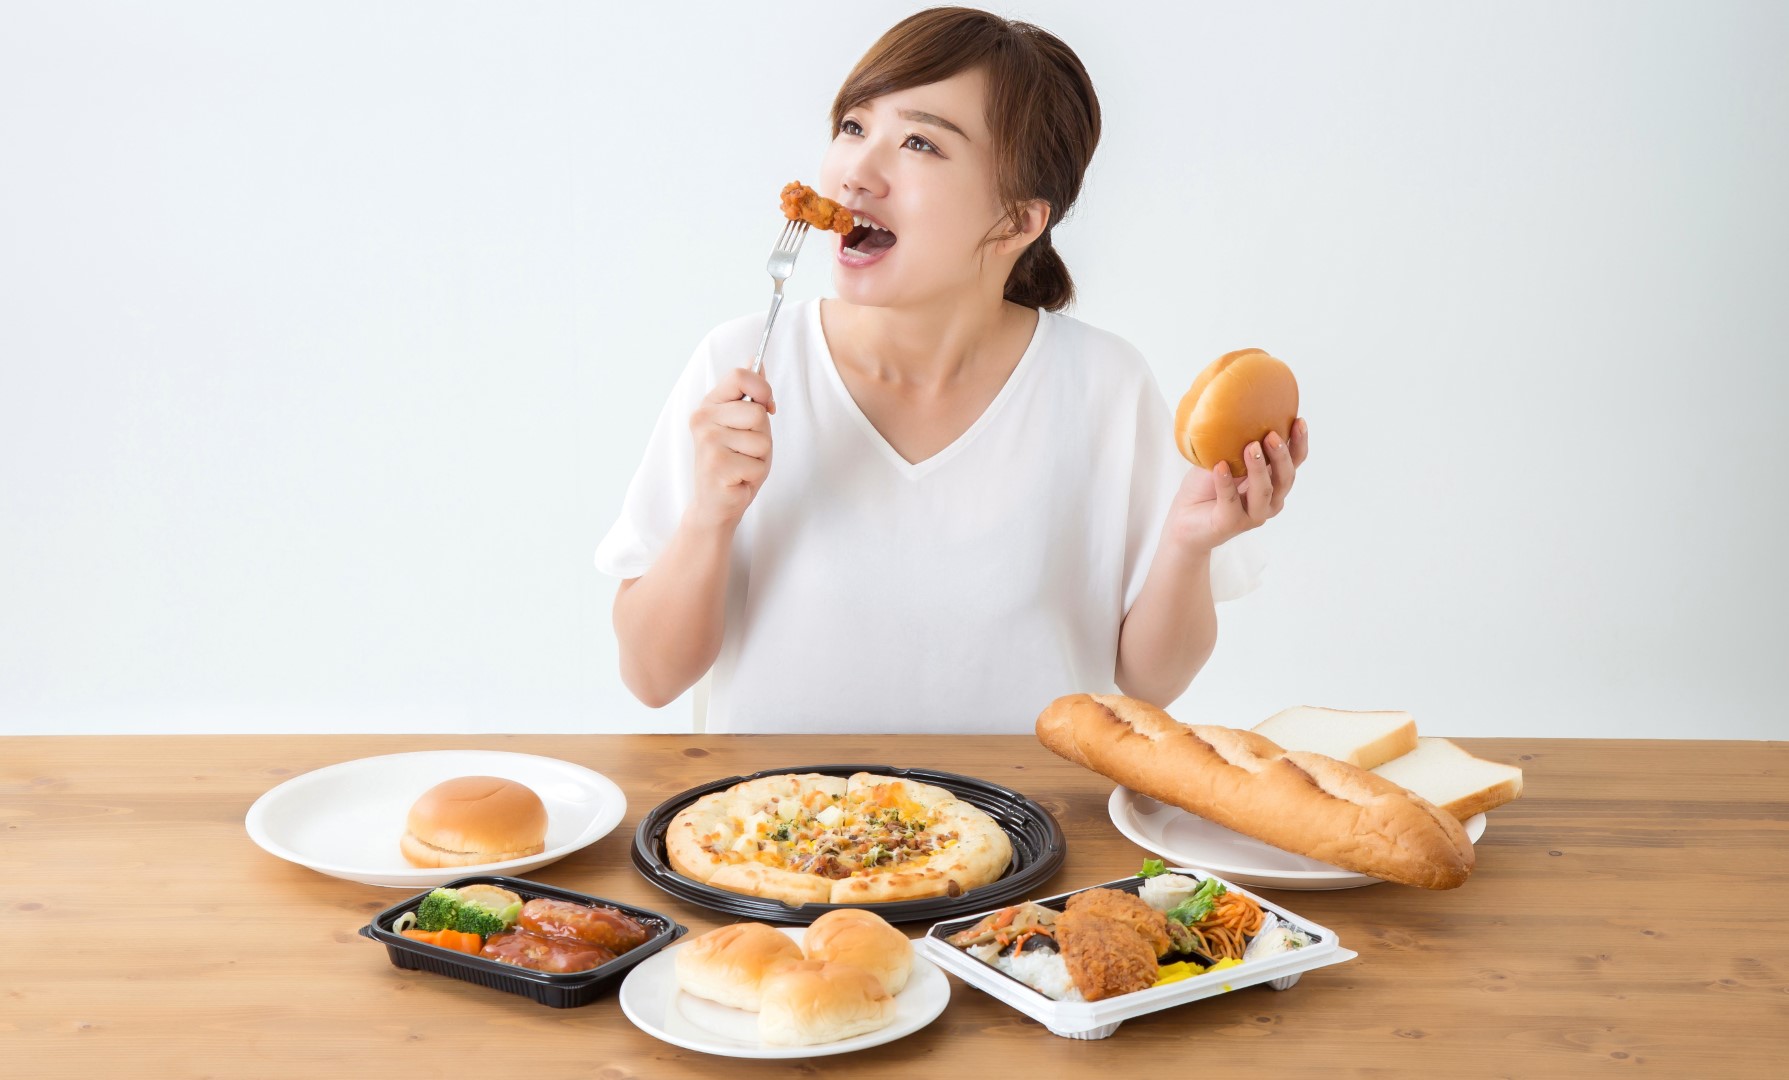 An Asian woman eating food at a table